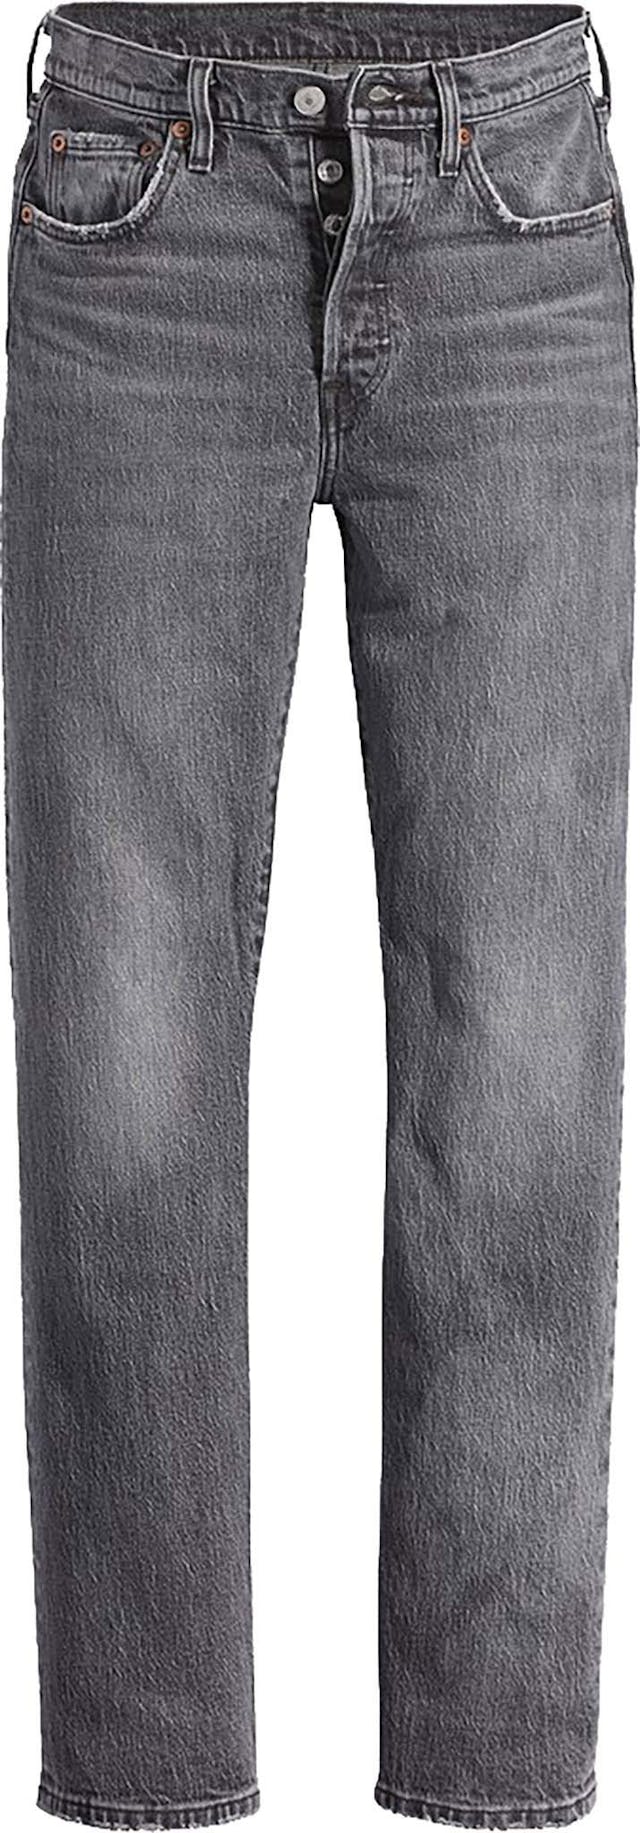 Product image for 501 Jeans - Women's